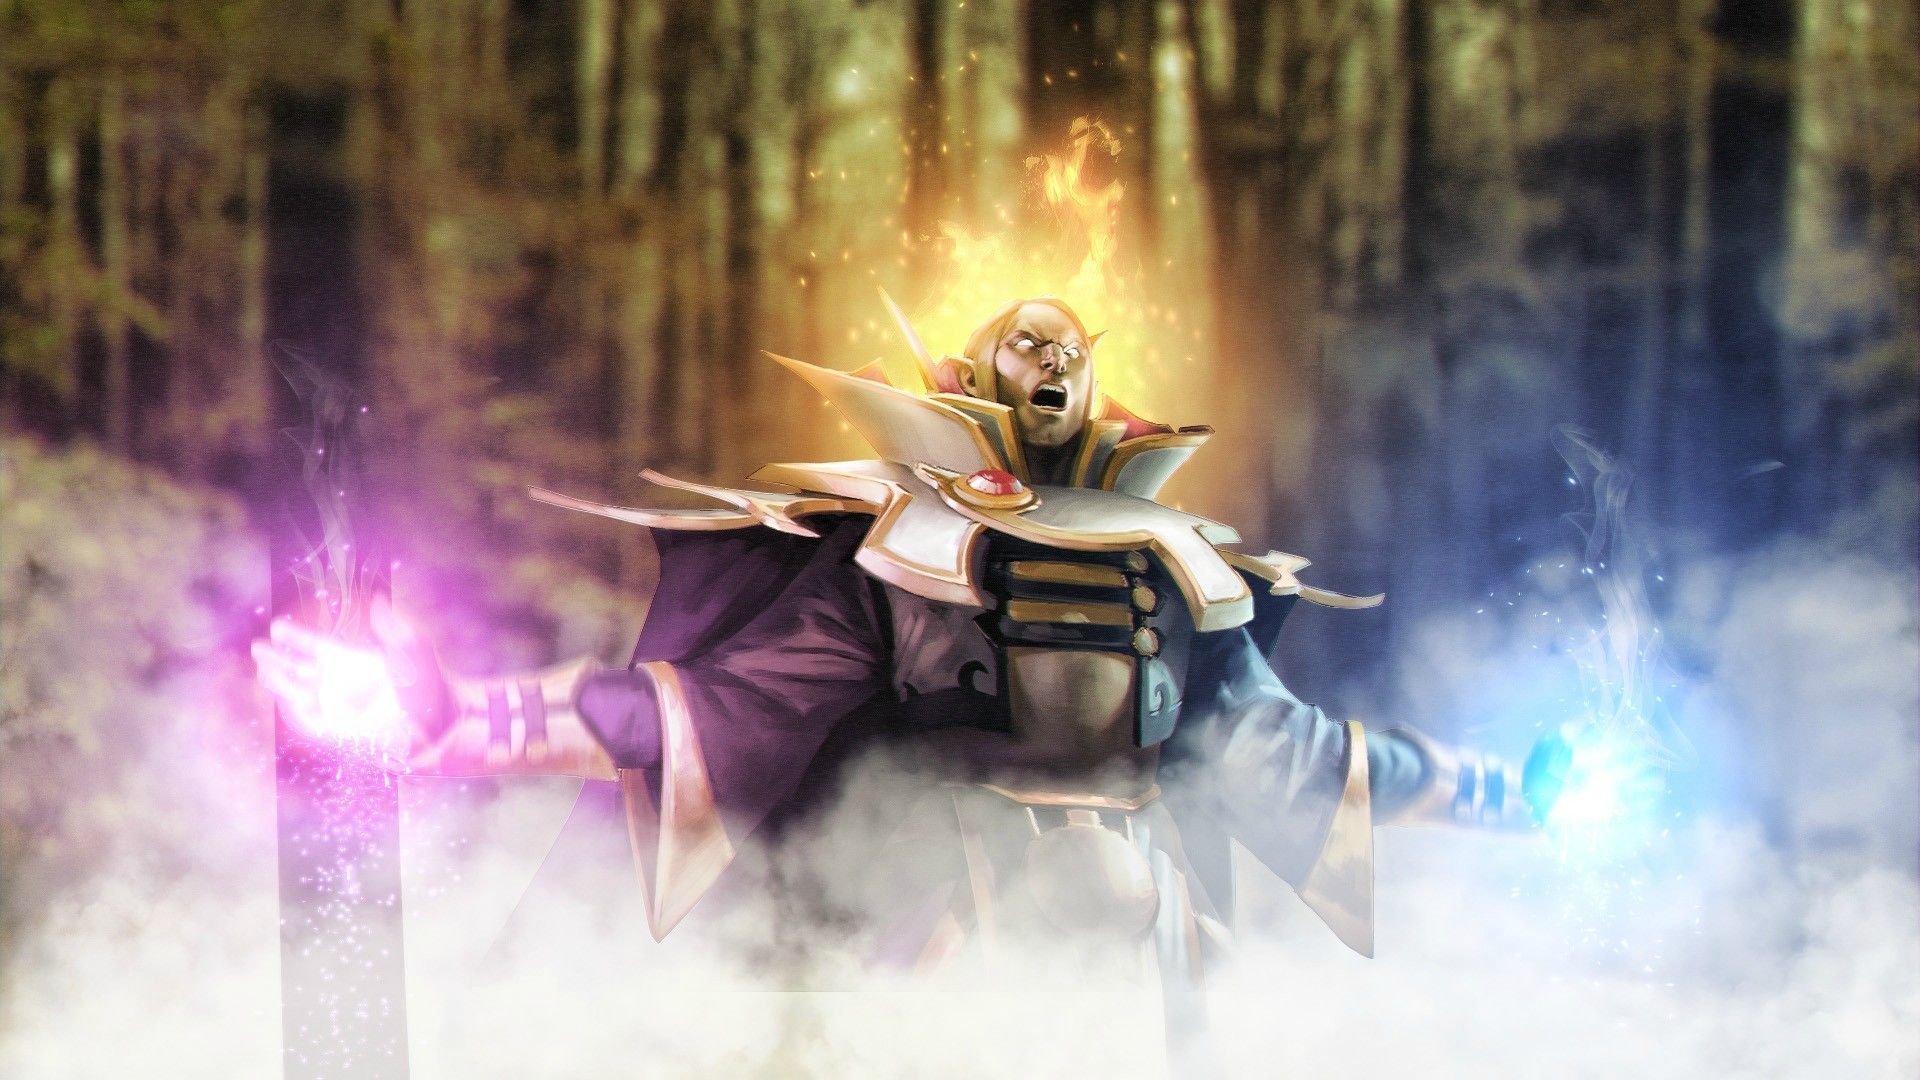 Another Wallpaper (Invoker) Composed By me : DotA2